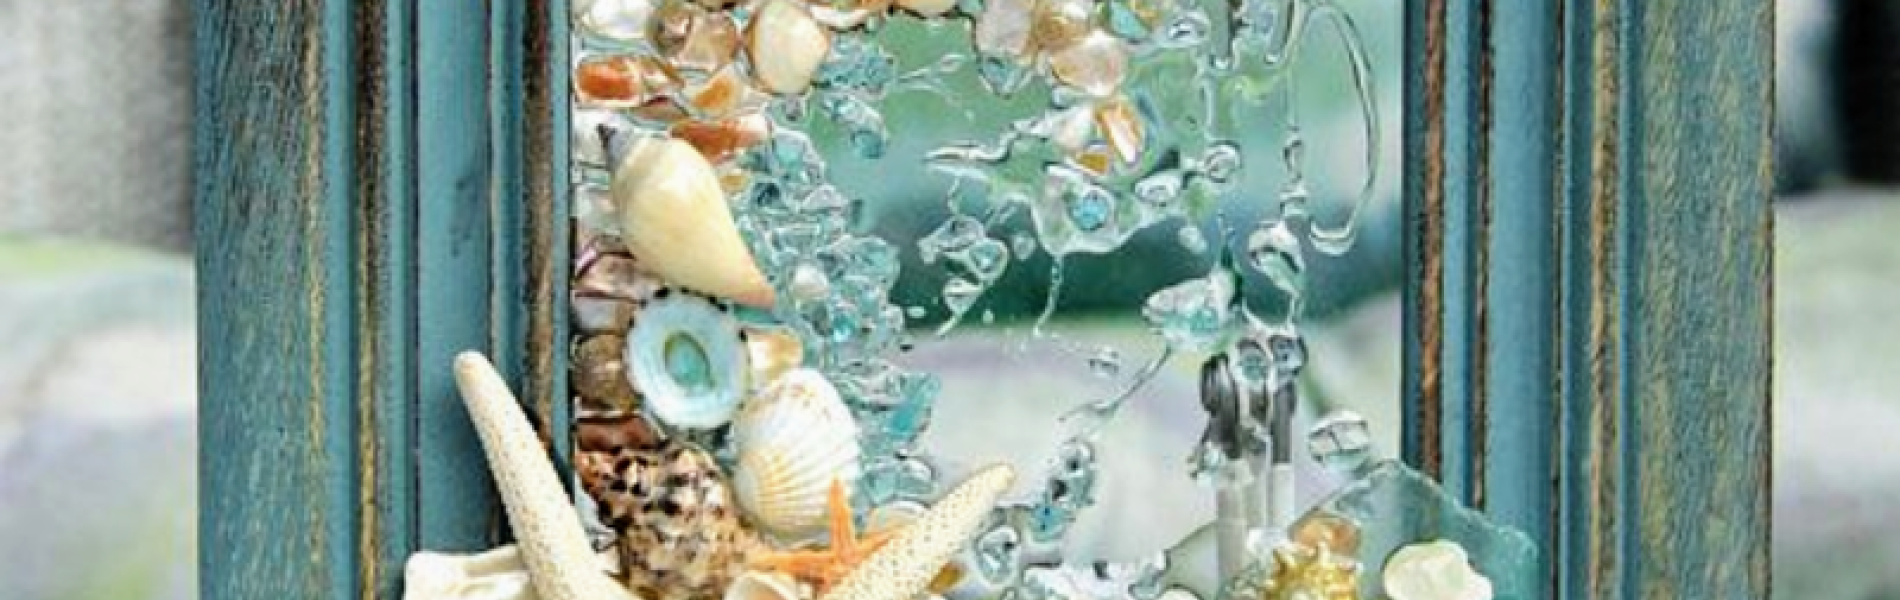 Image of 8x10 frame filled with beach treasures in clear resin